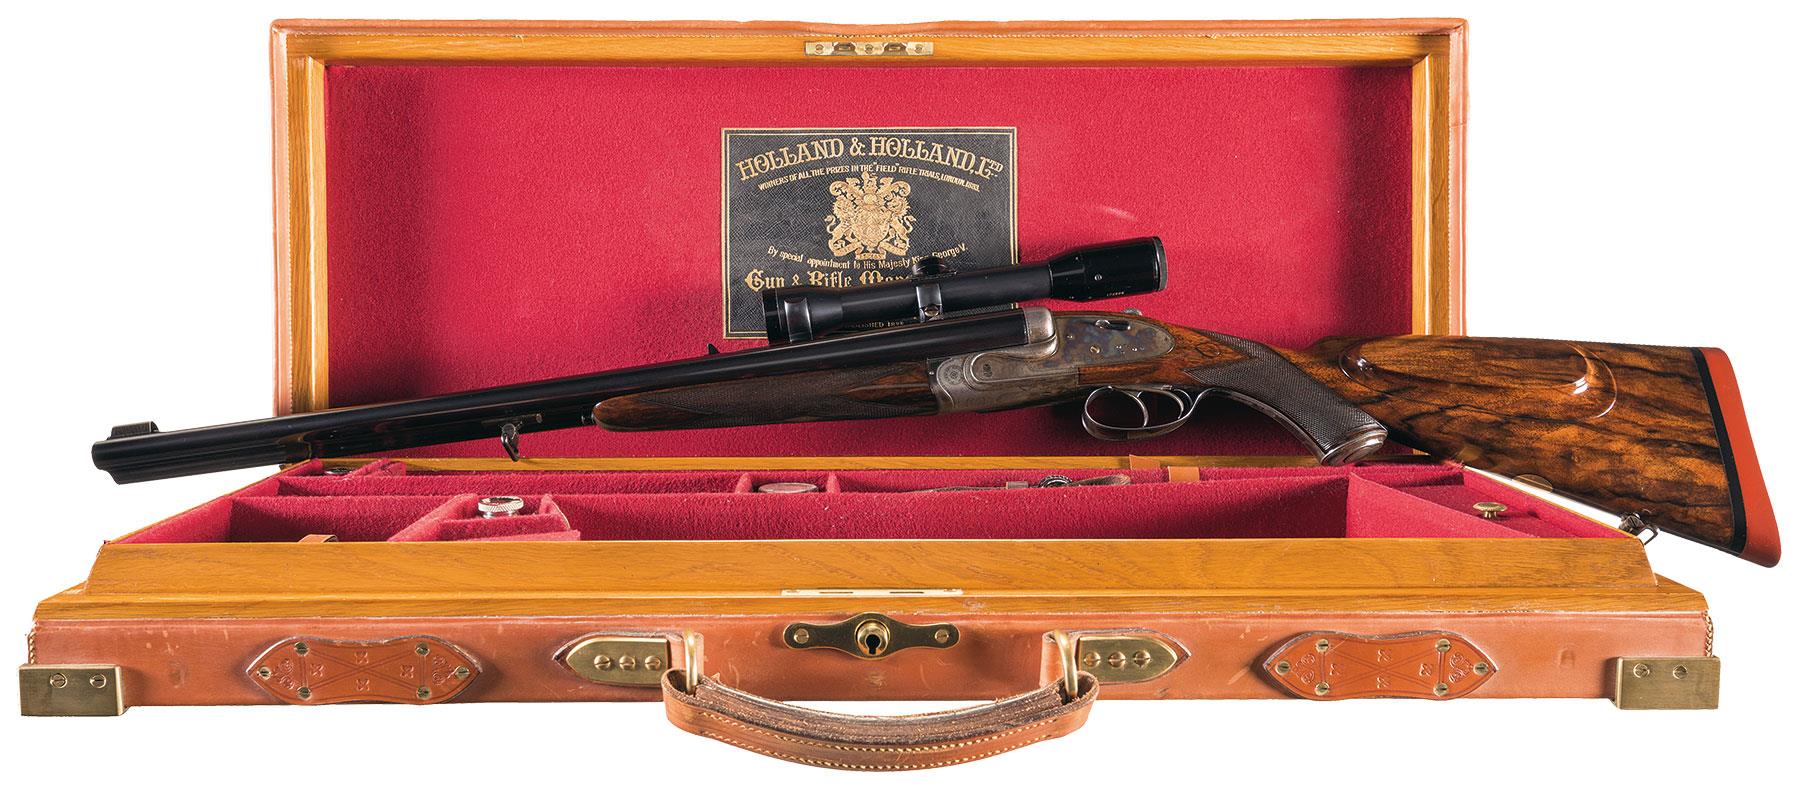 Holland & Holland Royal double rifle in .577 Nitro Express. 